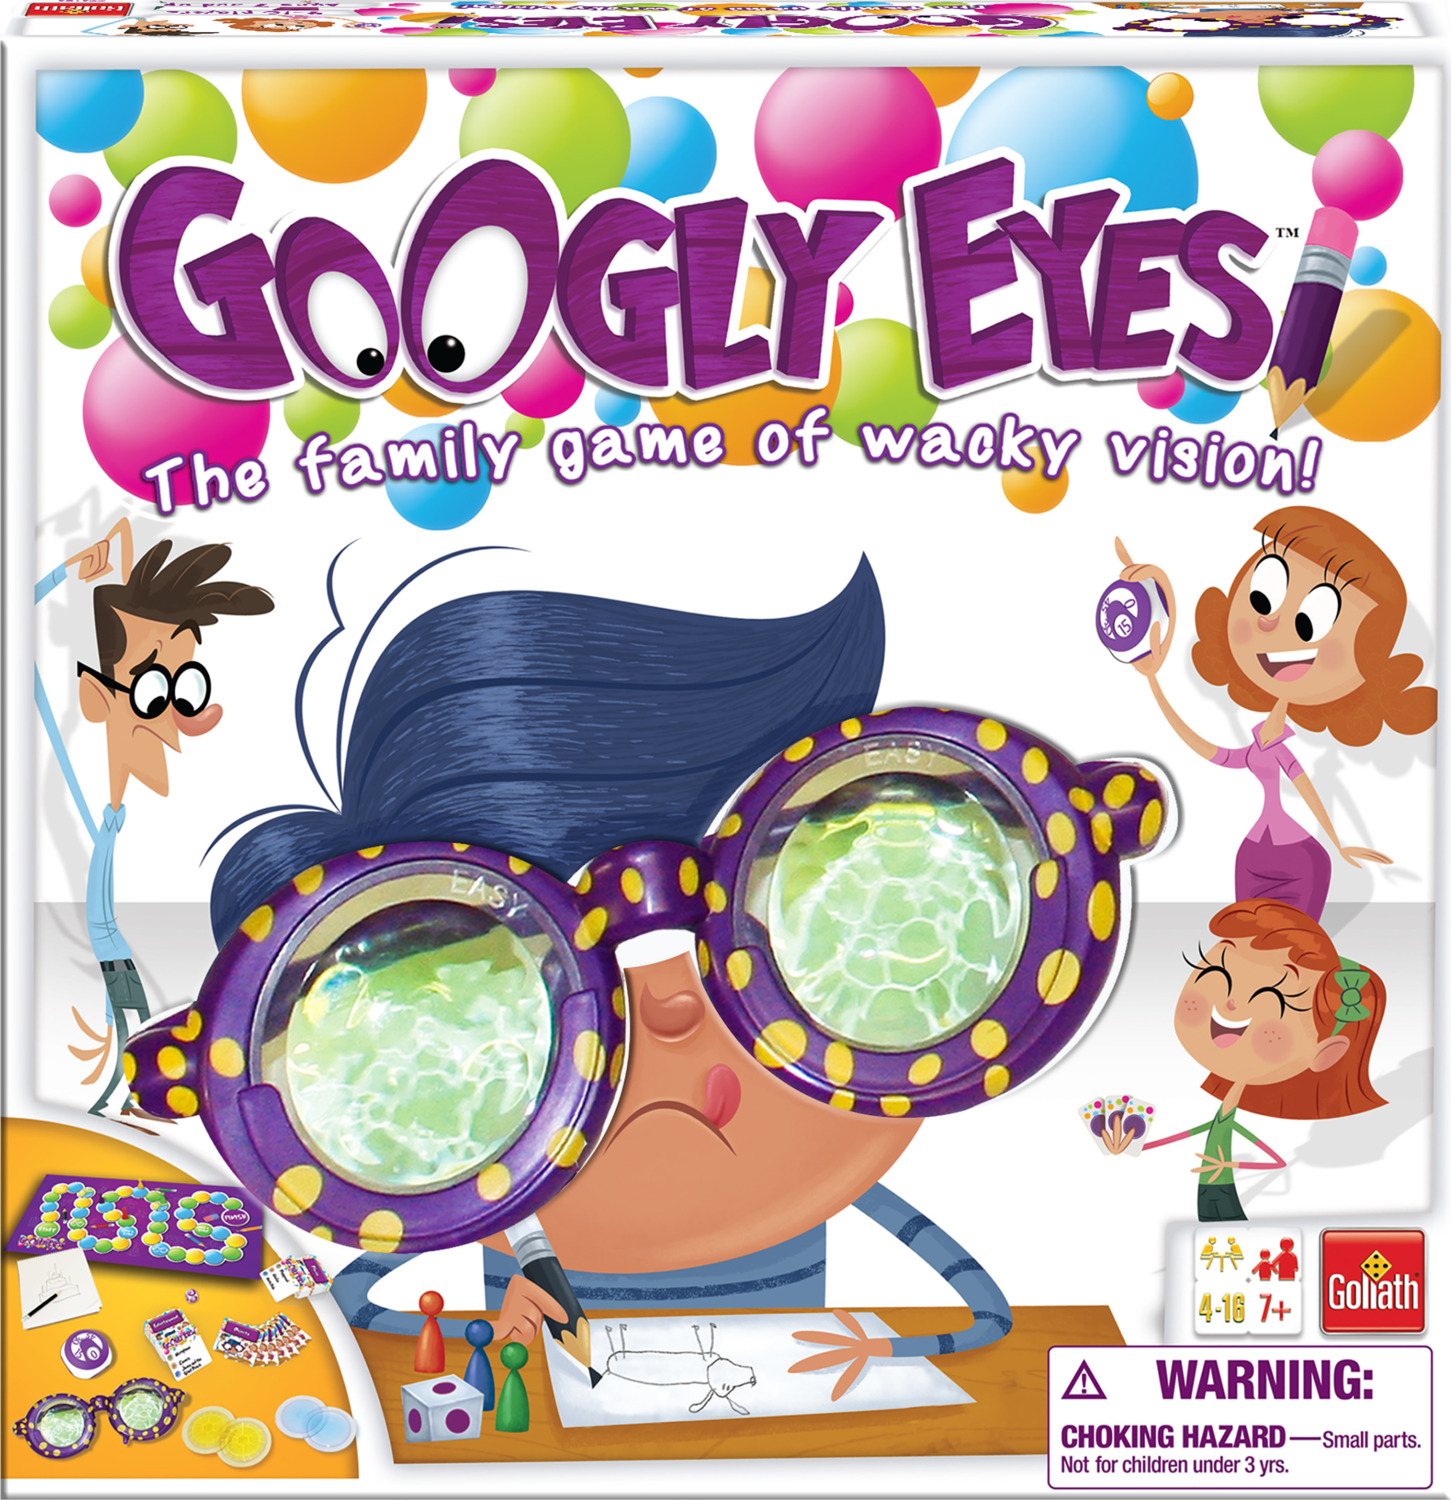 Googly Eyes Game - Family Drawing Game with Crazy, Vision-Altering